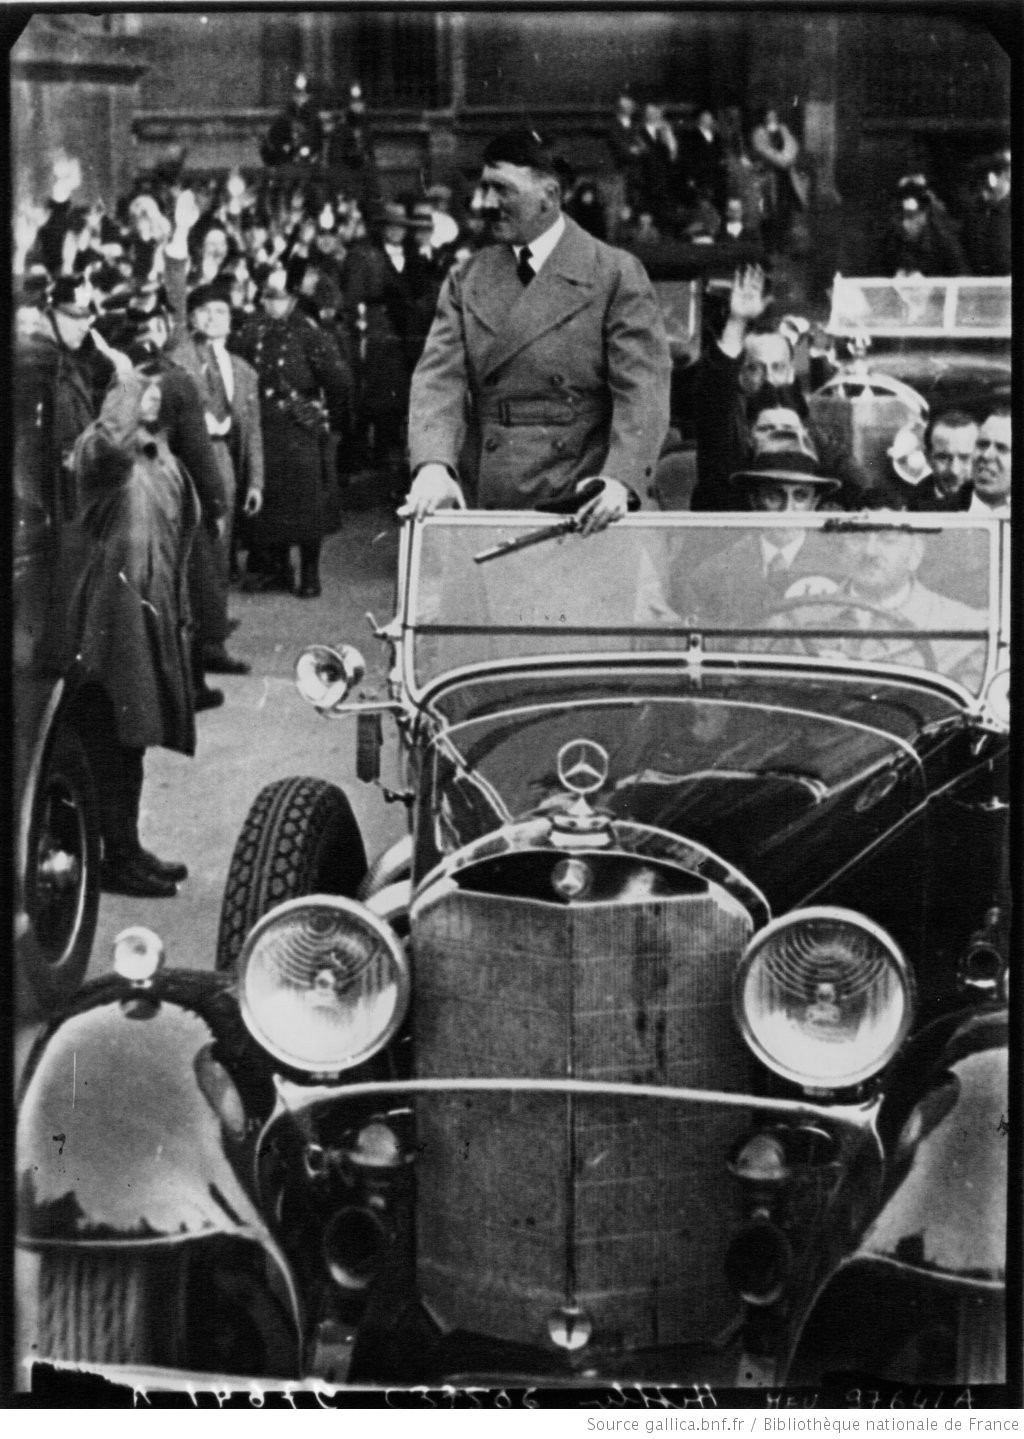 Adolf Hitler on his way to the Siemens factory to deliver a speech